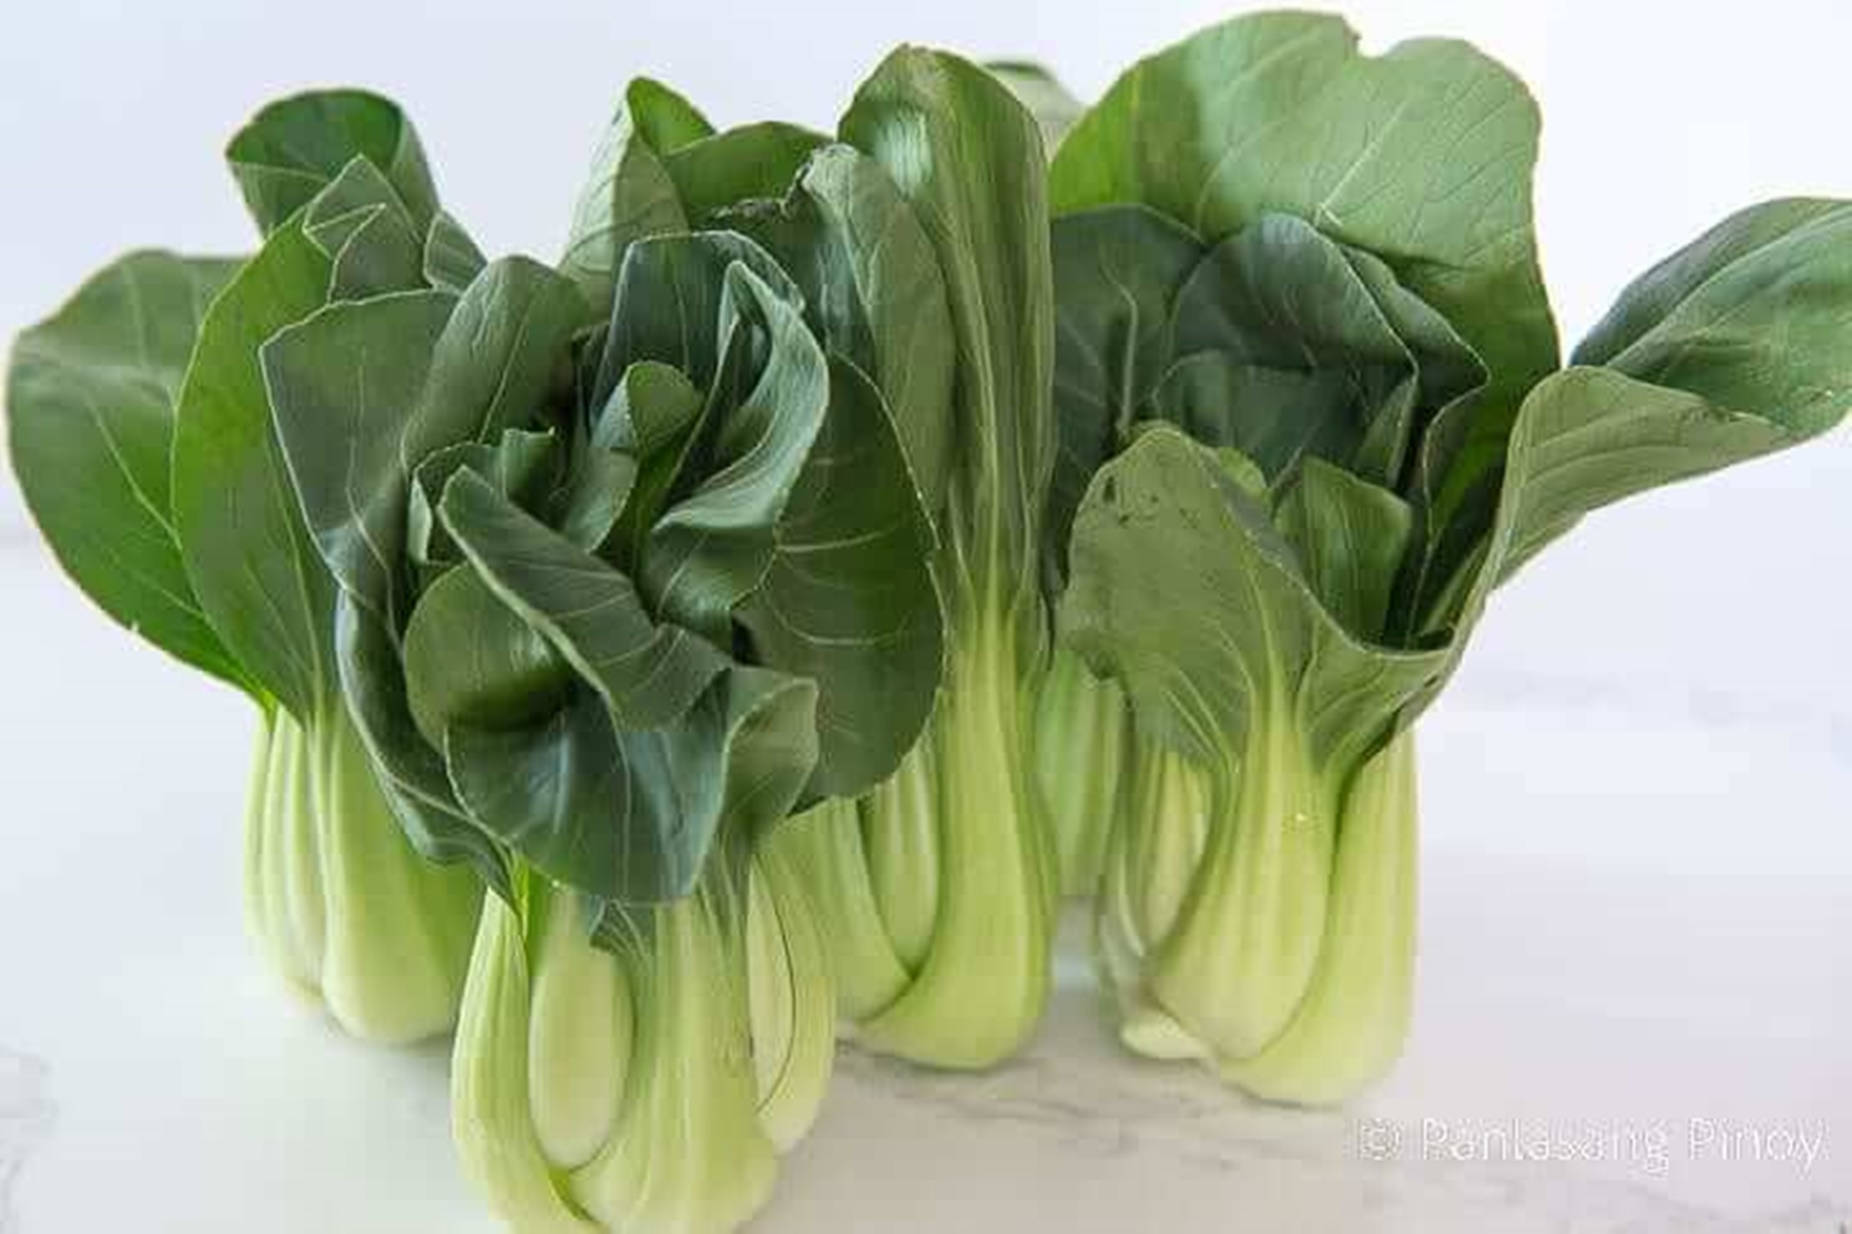 Fresh Bok Choy - The Healthy Chinese Cabbage Wallpaper